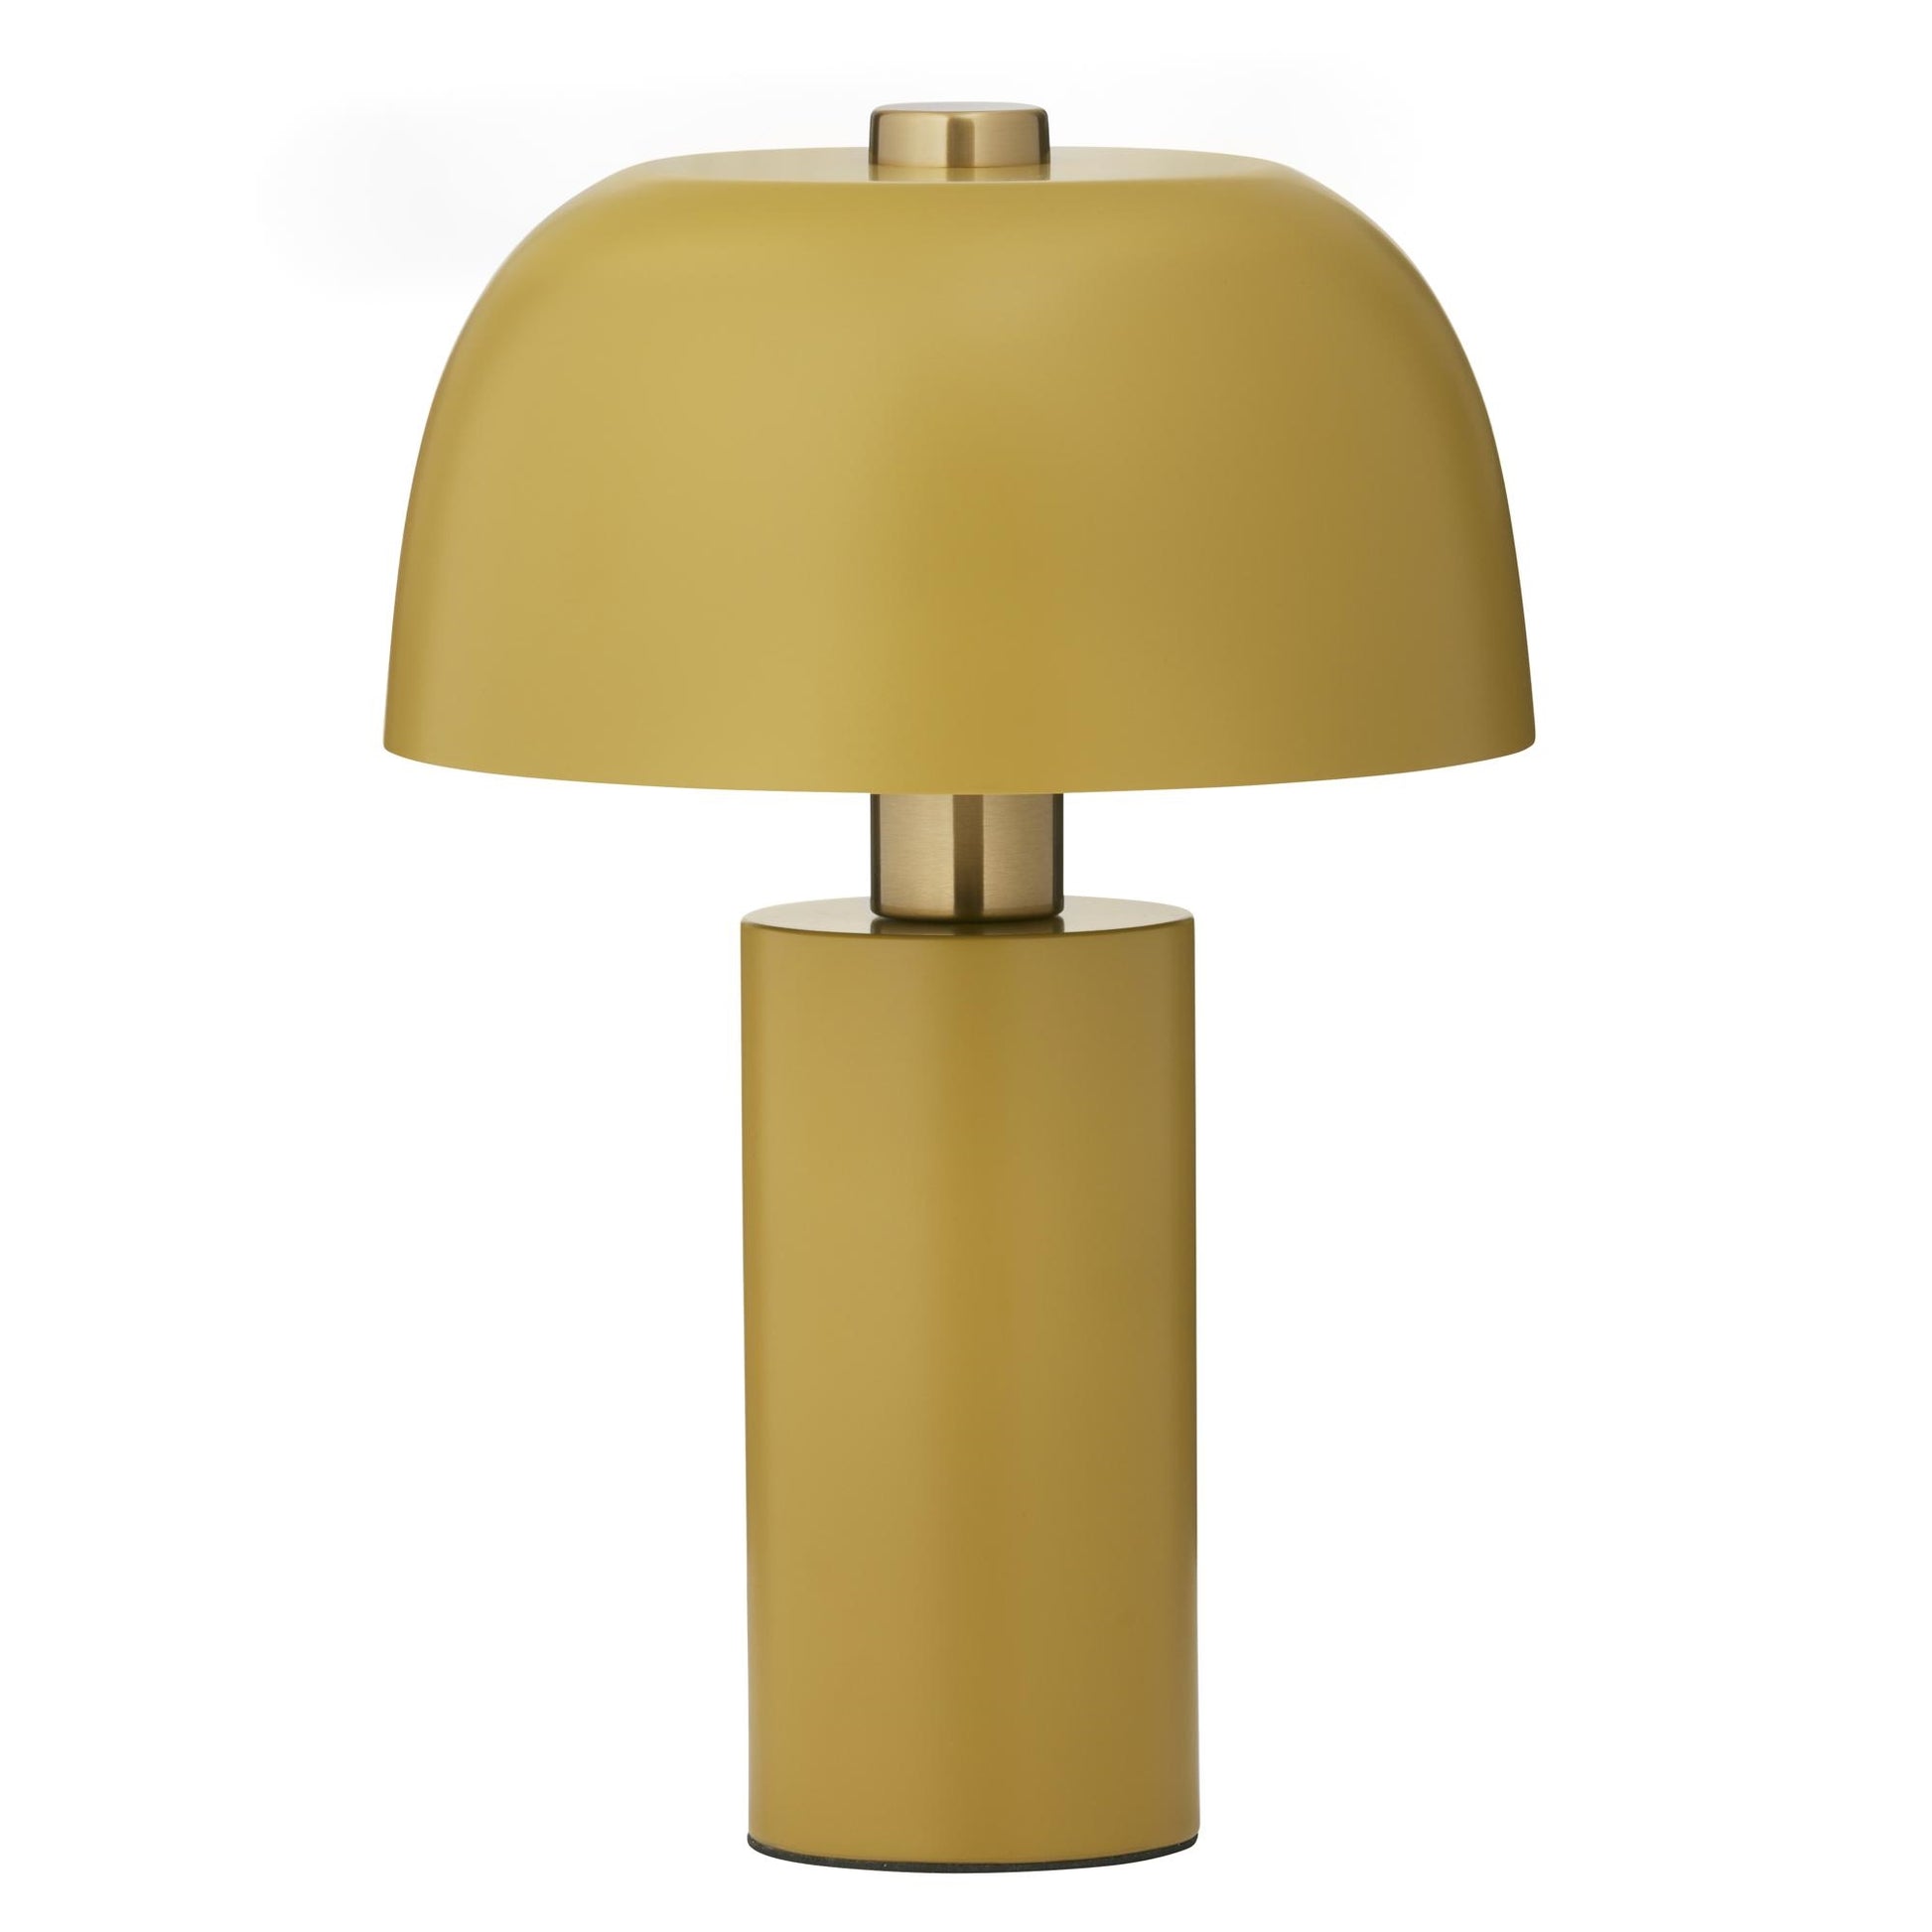 Lulu Table Lamp by Cozy Living #Curry